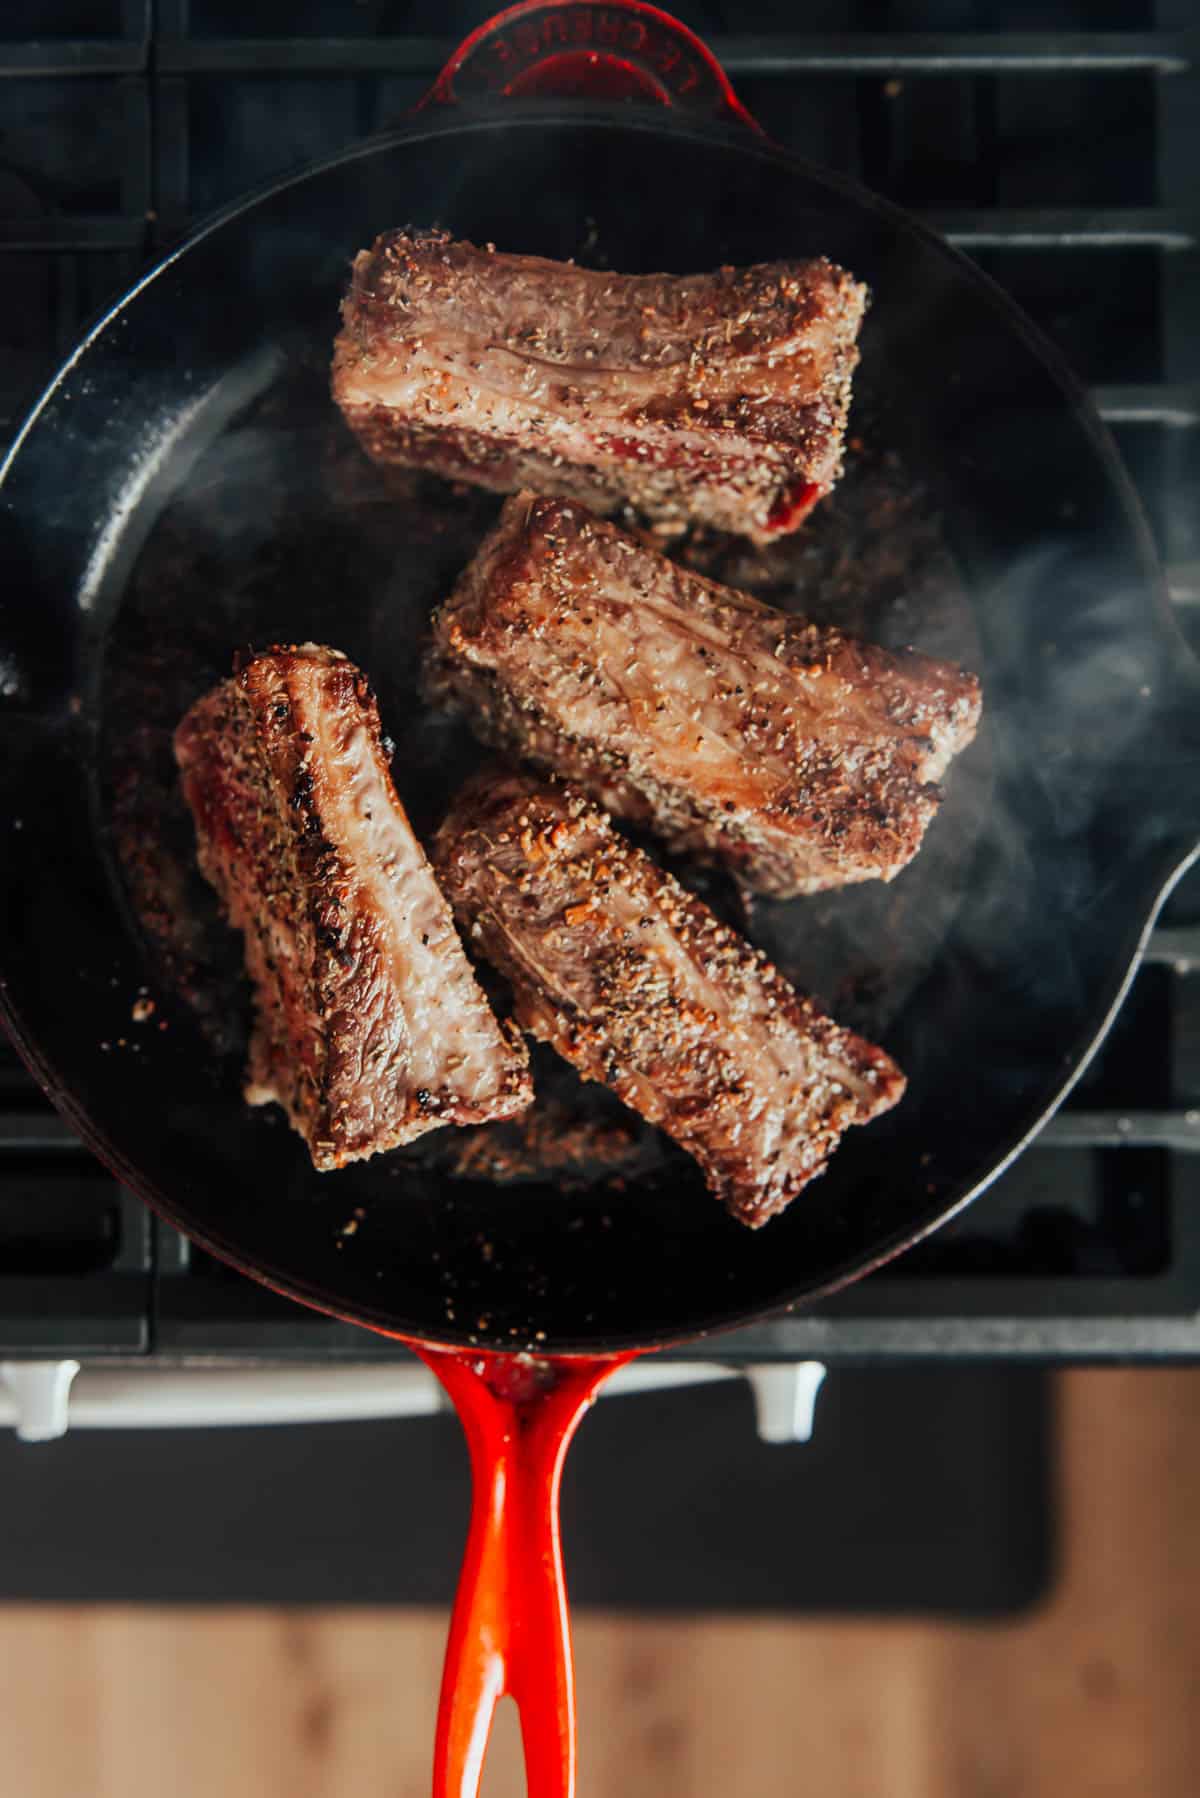 Beef ribs in a searing pan on a stove top.